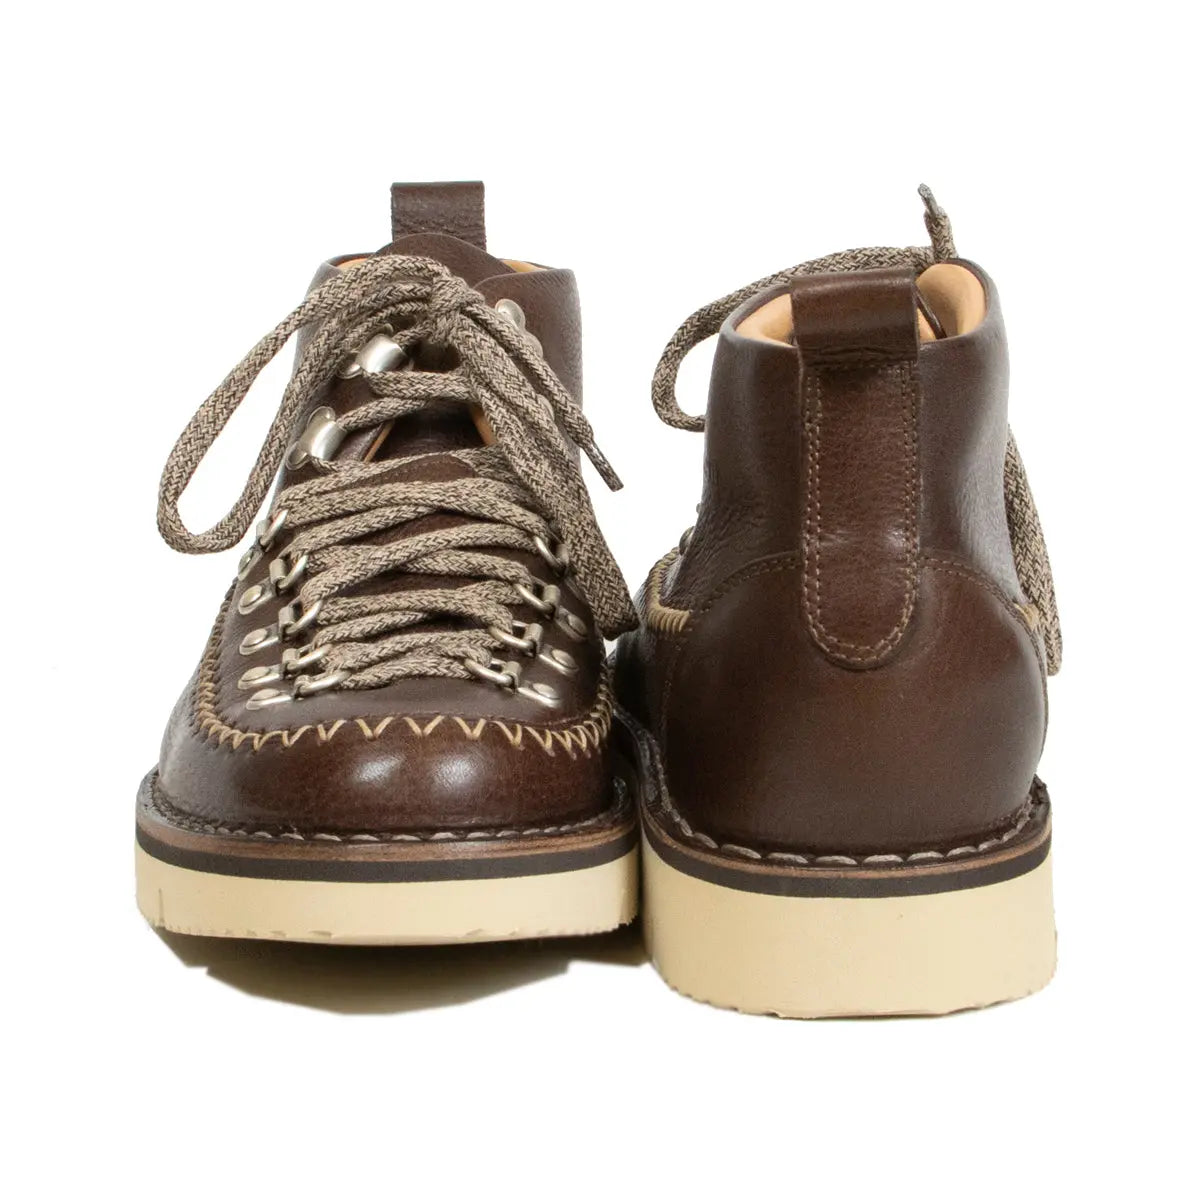 Brown Magnifico M120 Indian Boots  Fracap   